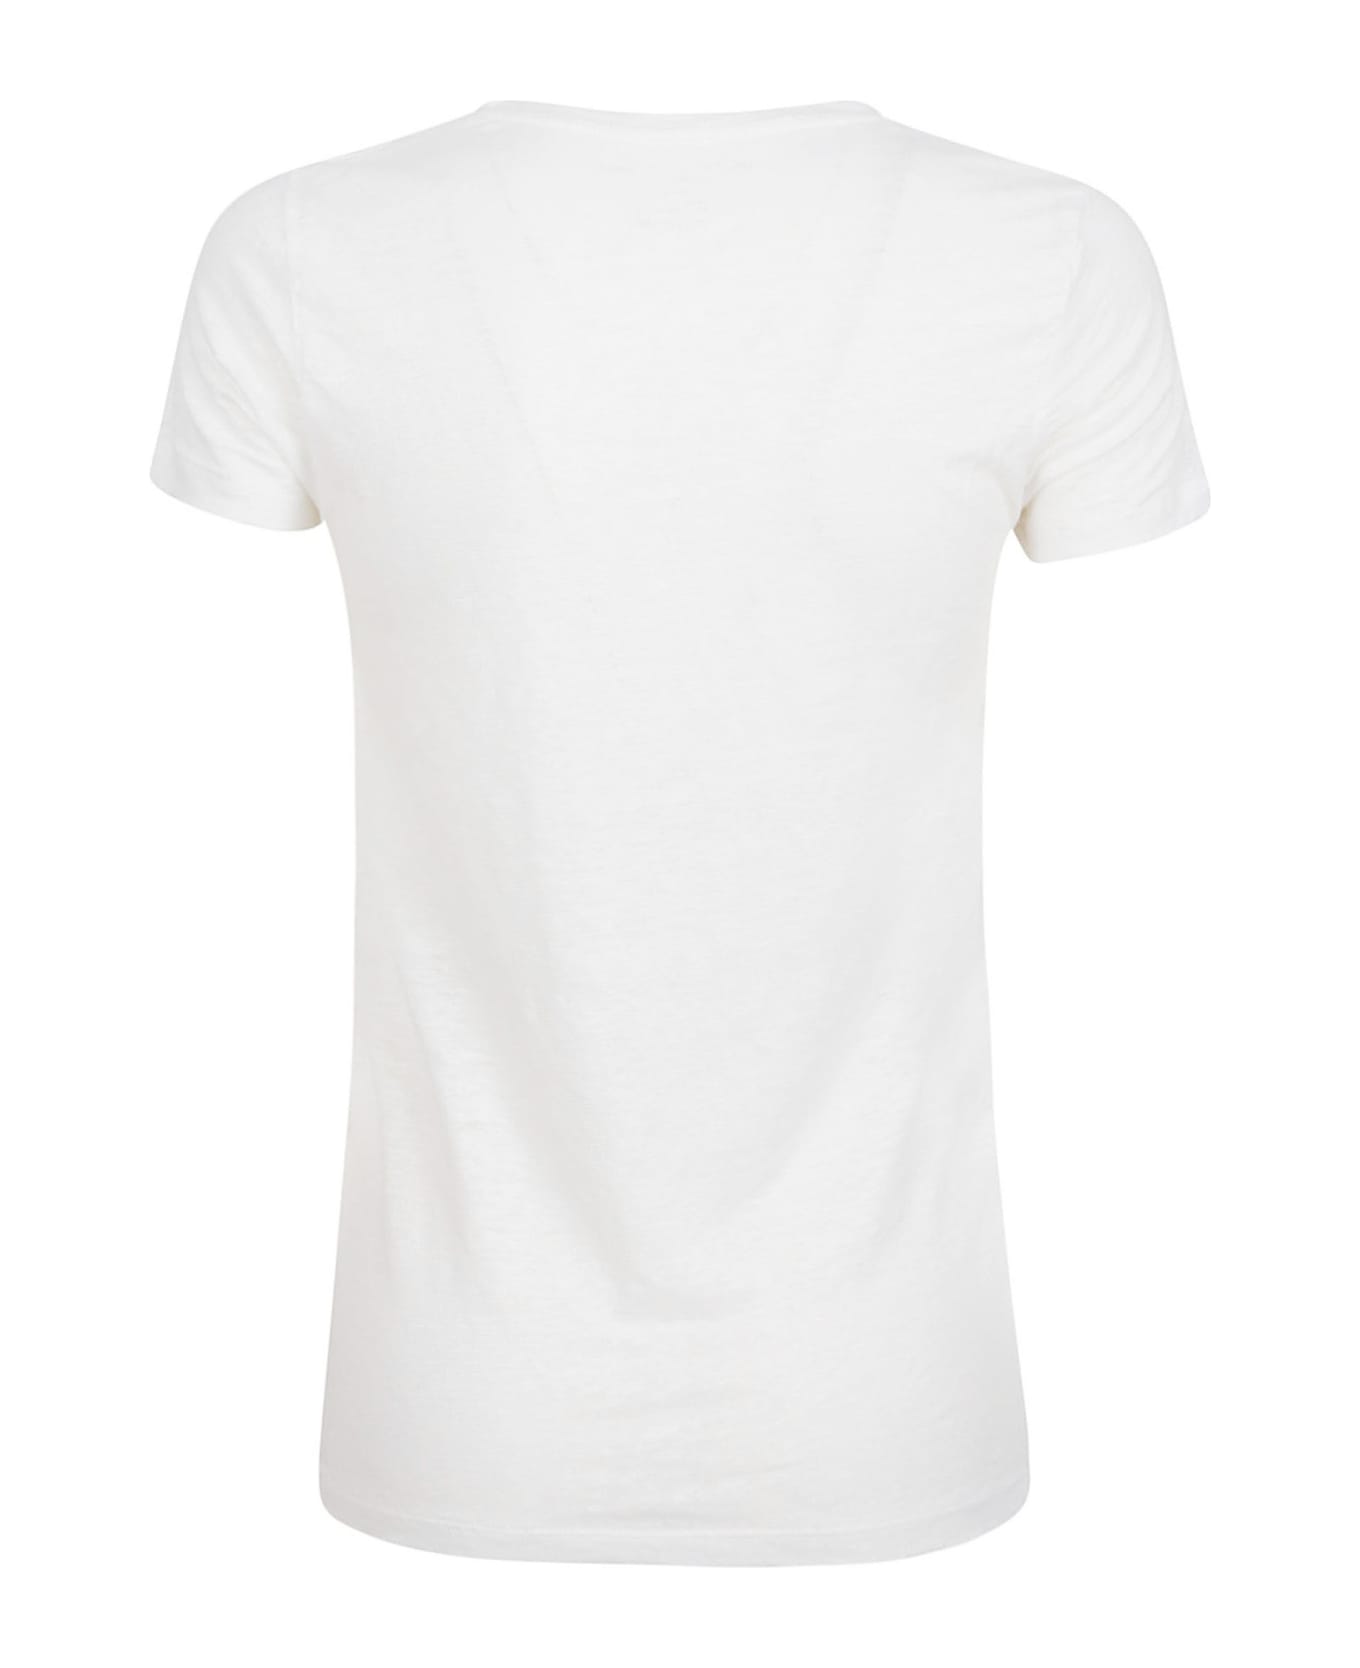 Majestic Filatures Majestic T-shirts And Polos White - White